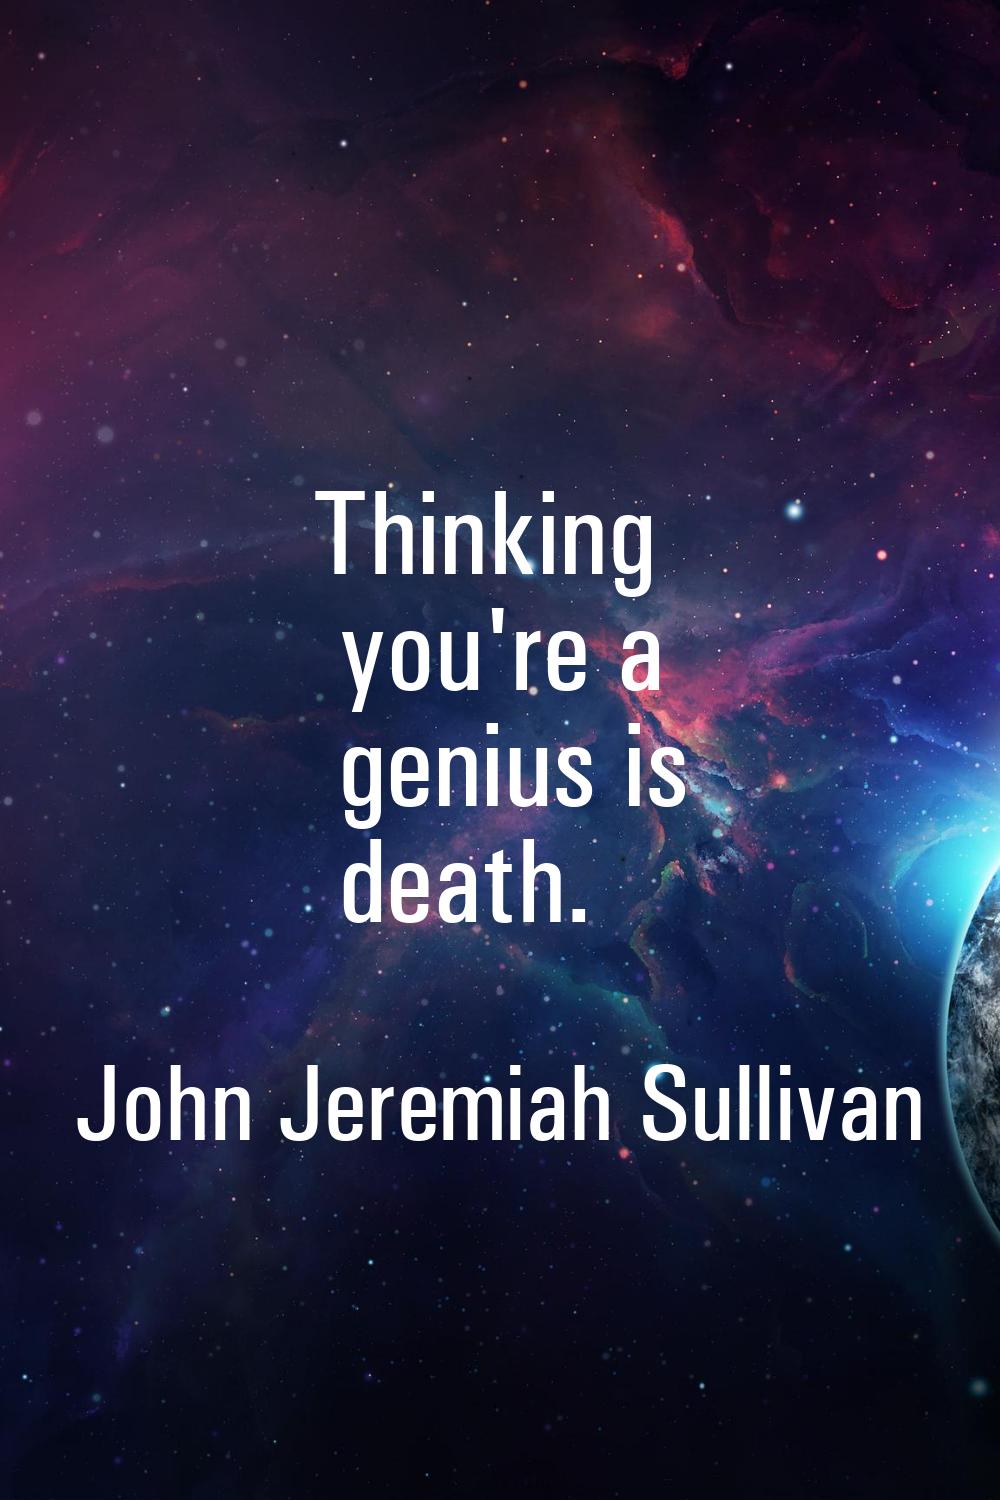 Thinking you're a genius is death.